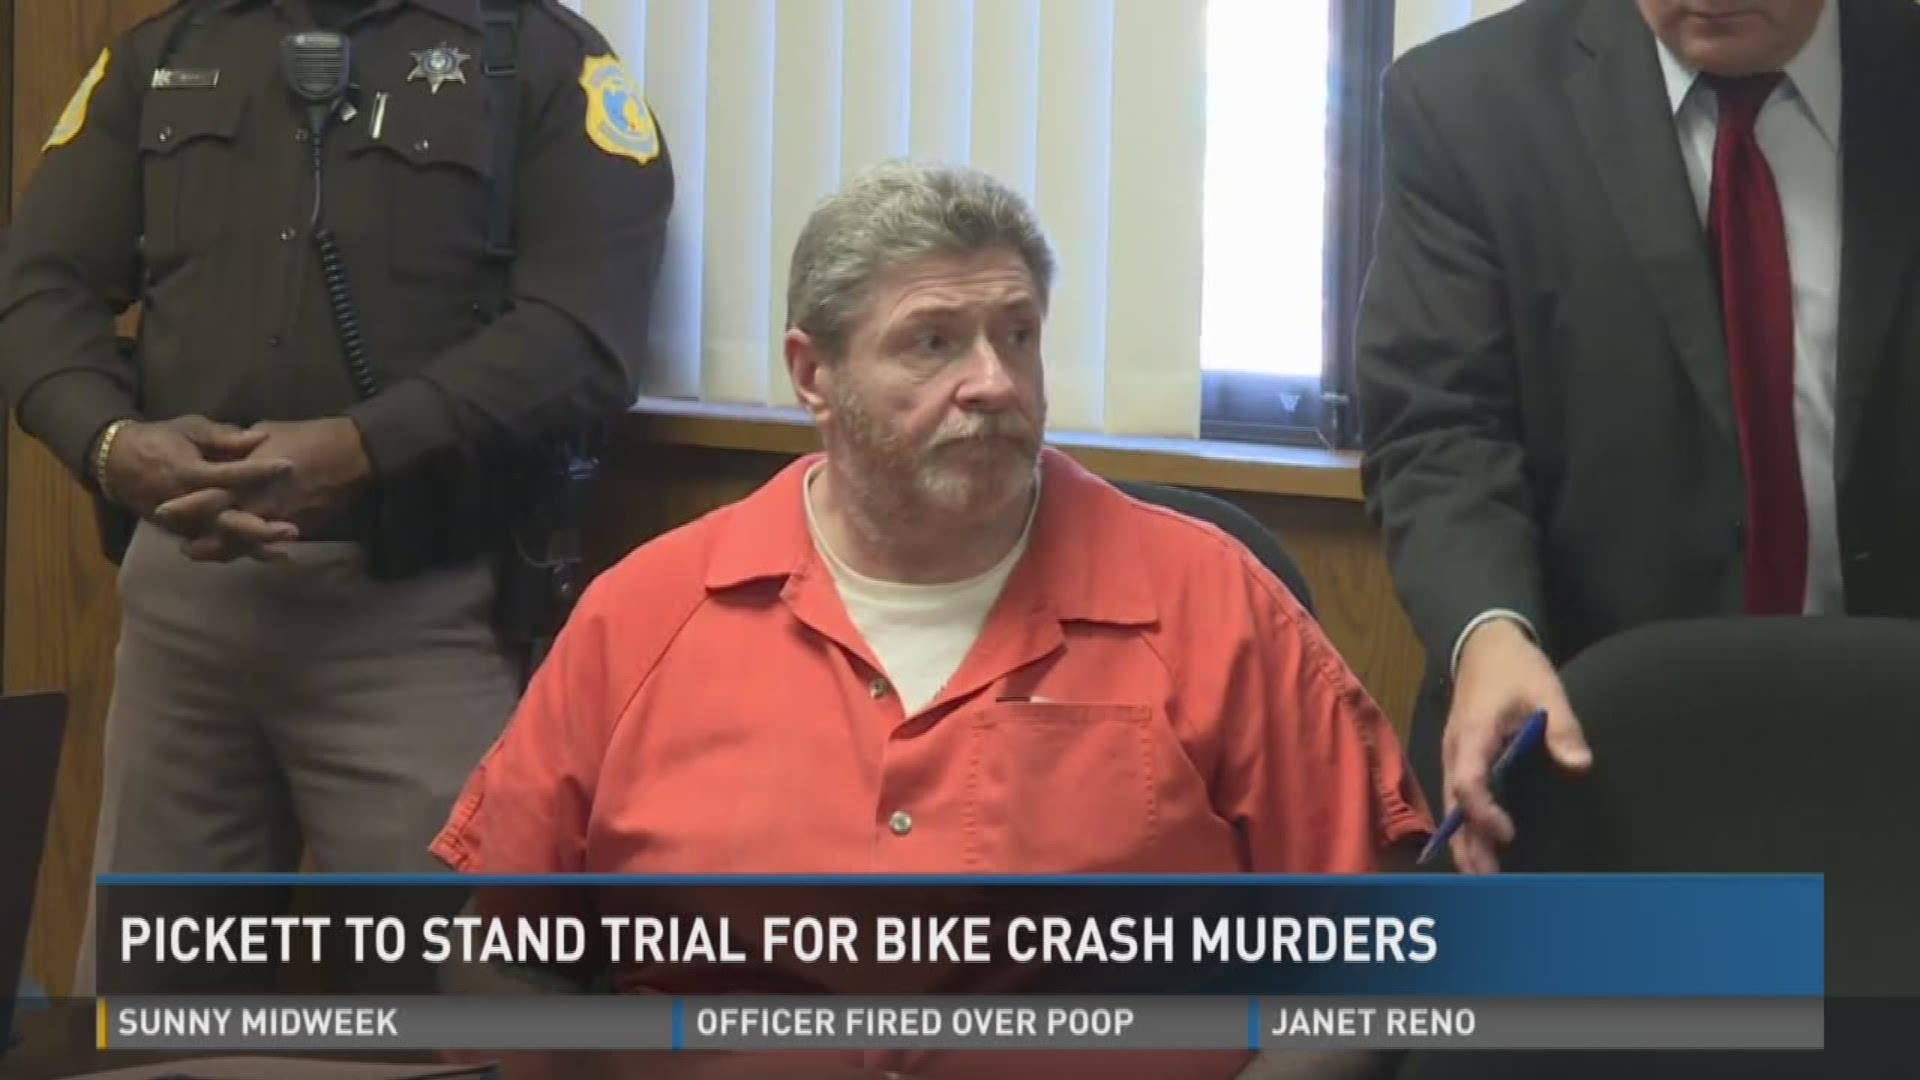 The man accused of running down a group of bicyclists near Kalamazoo, killing five people, is headed to trial on murder charges.